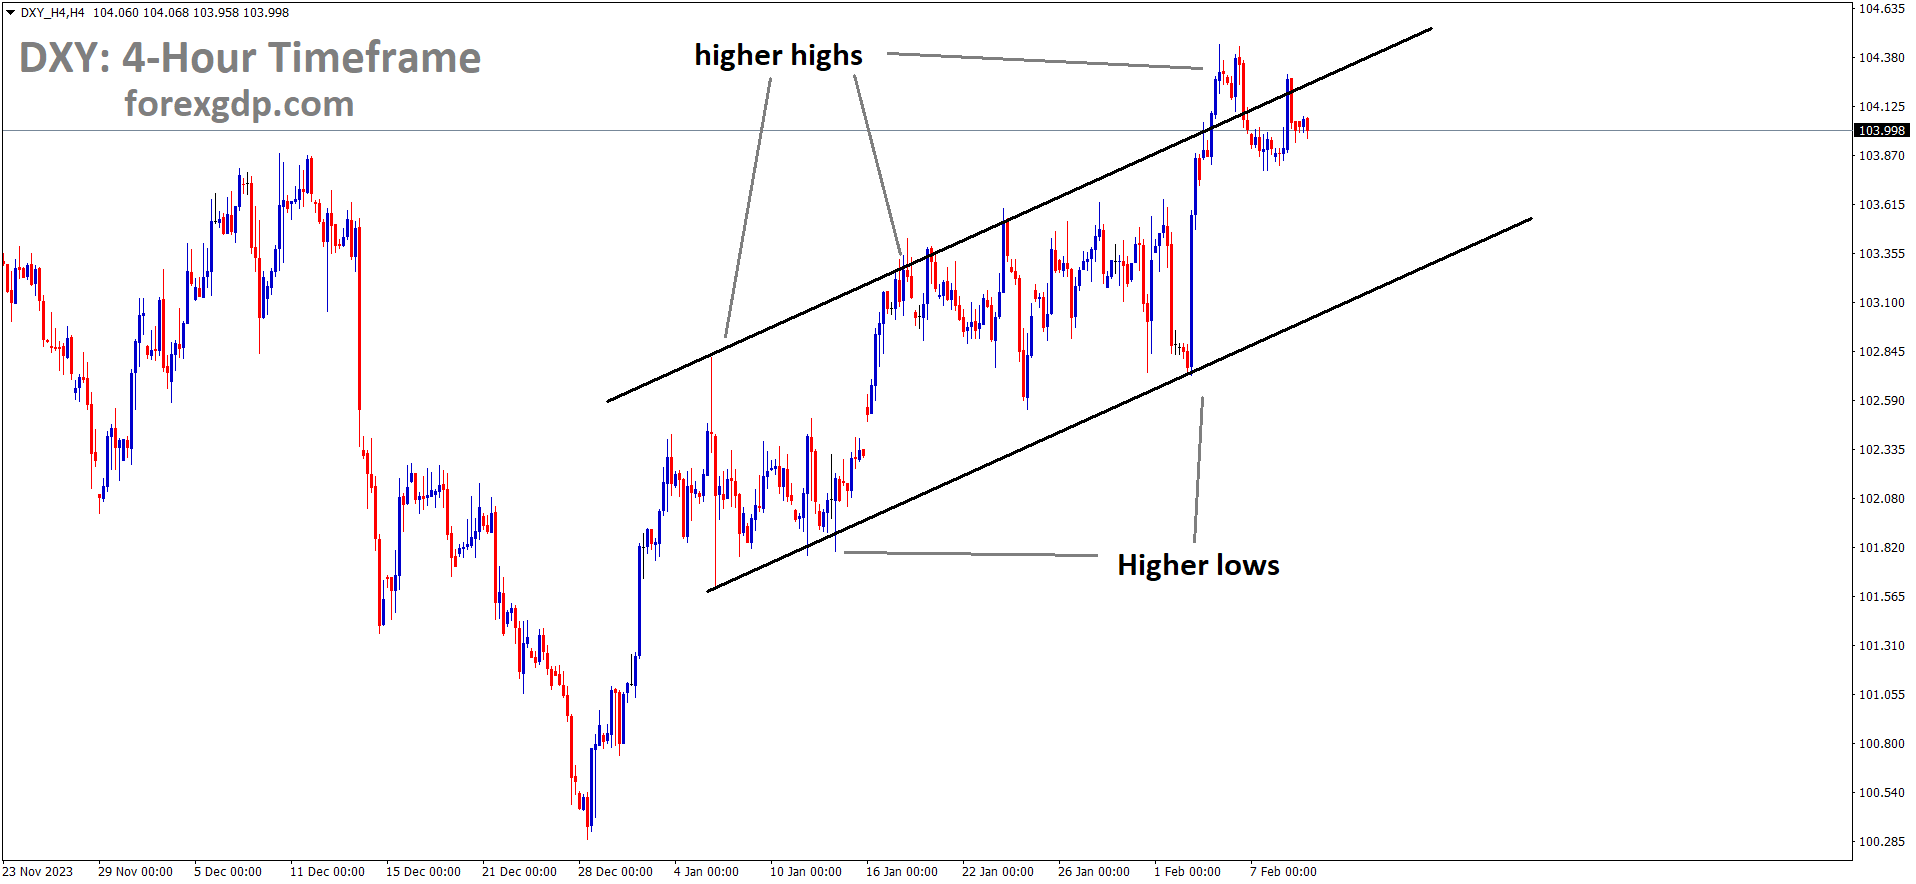 USD index is moving in an Ascending channel and the market has reached the higher high area of the channel